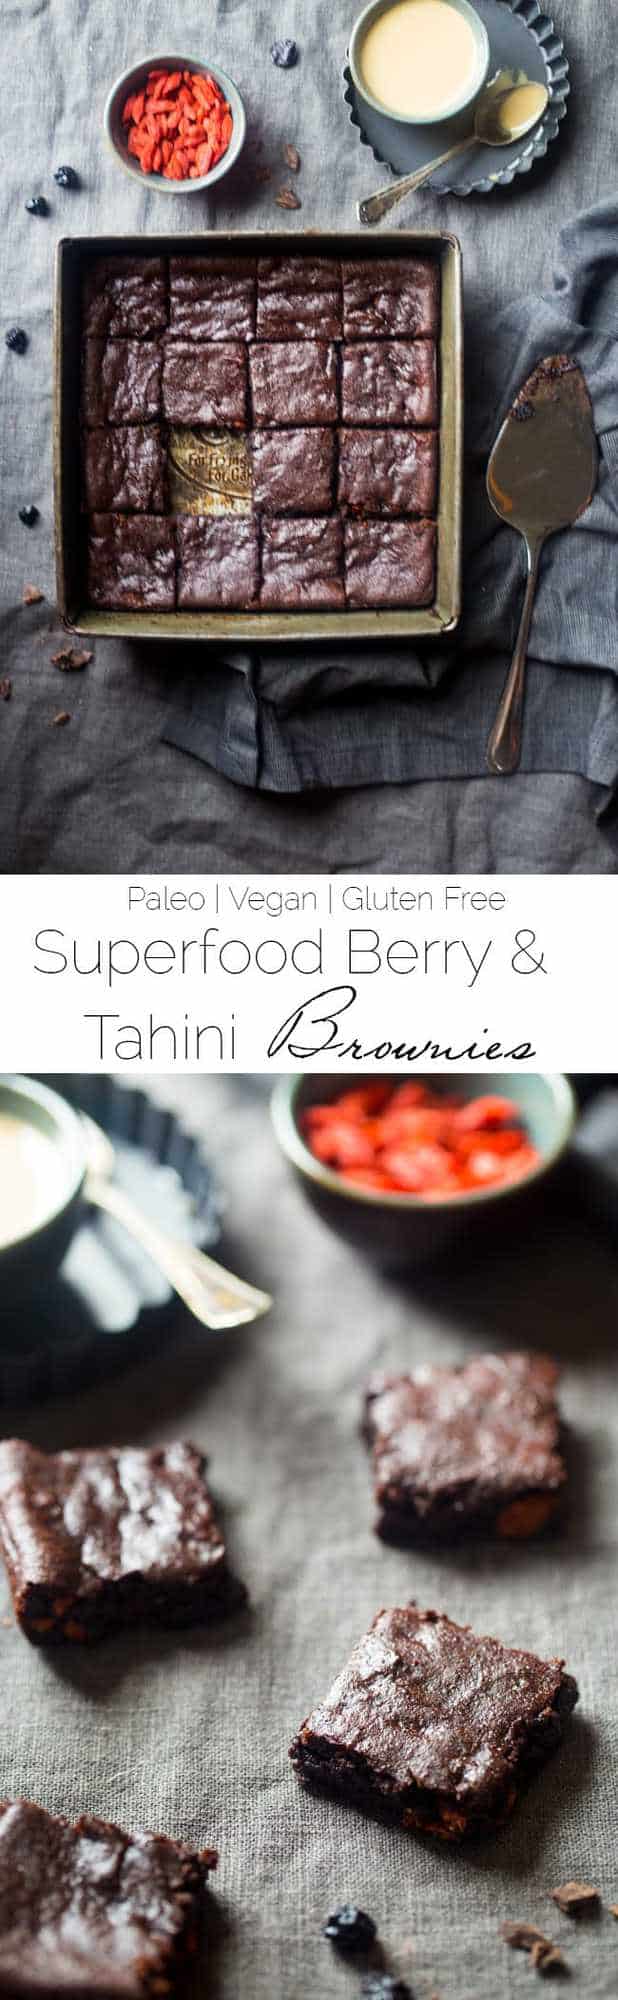 Vegan Superfood Berry Tahini Brownies - These vegan brownies are so dense and chewy that you'd never know they're a superfood-packed, healthy and paleo friendly dessert for only 107 calories! | Foodfaithfitness.com | @FoodFaithFit